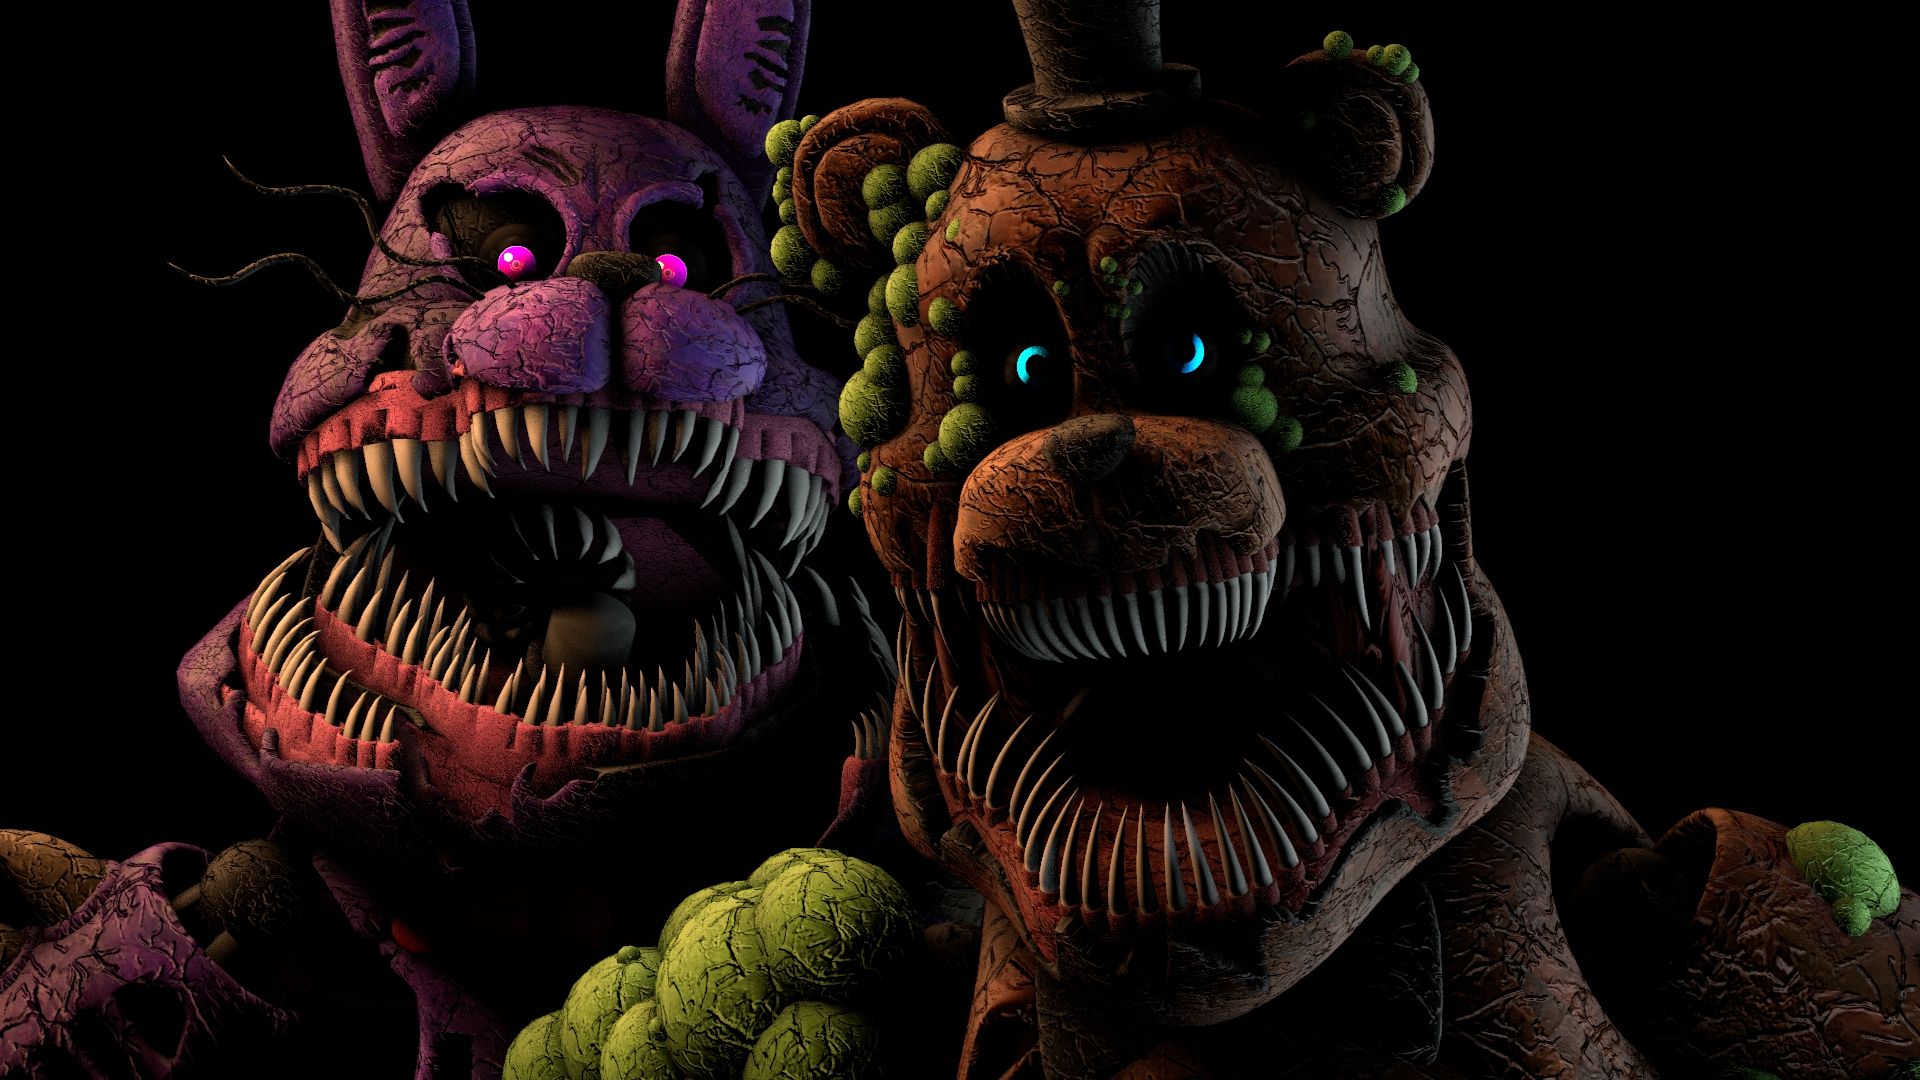 Twisted Fnaf Wallpapers posted by Ryan Simpson.